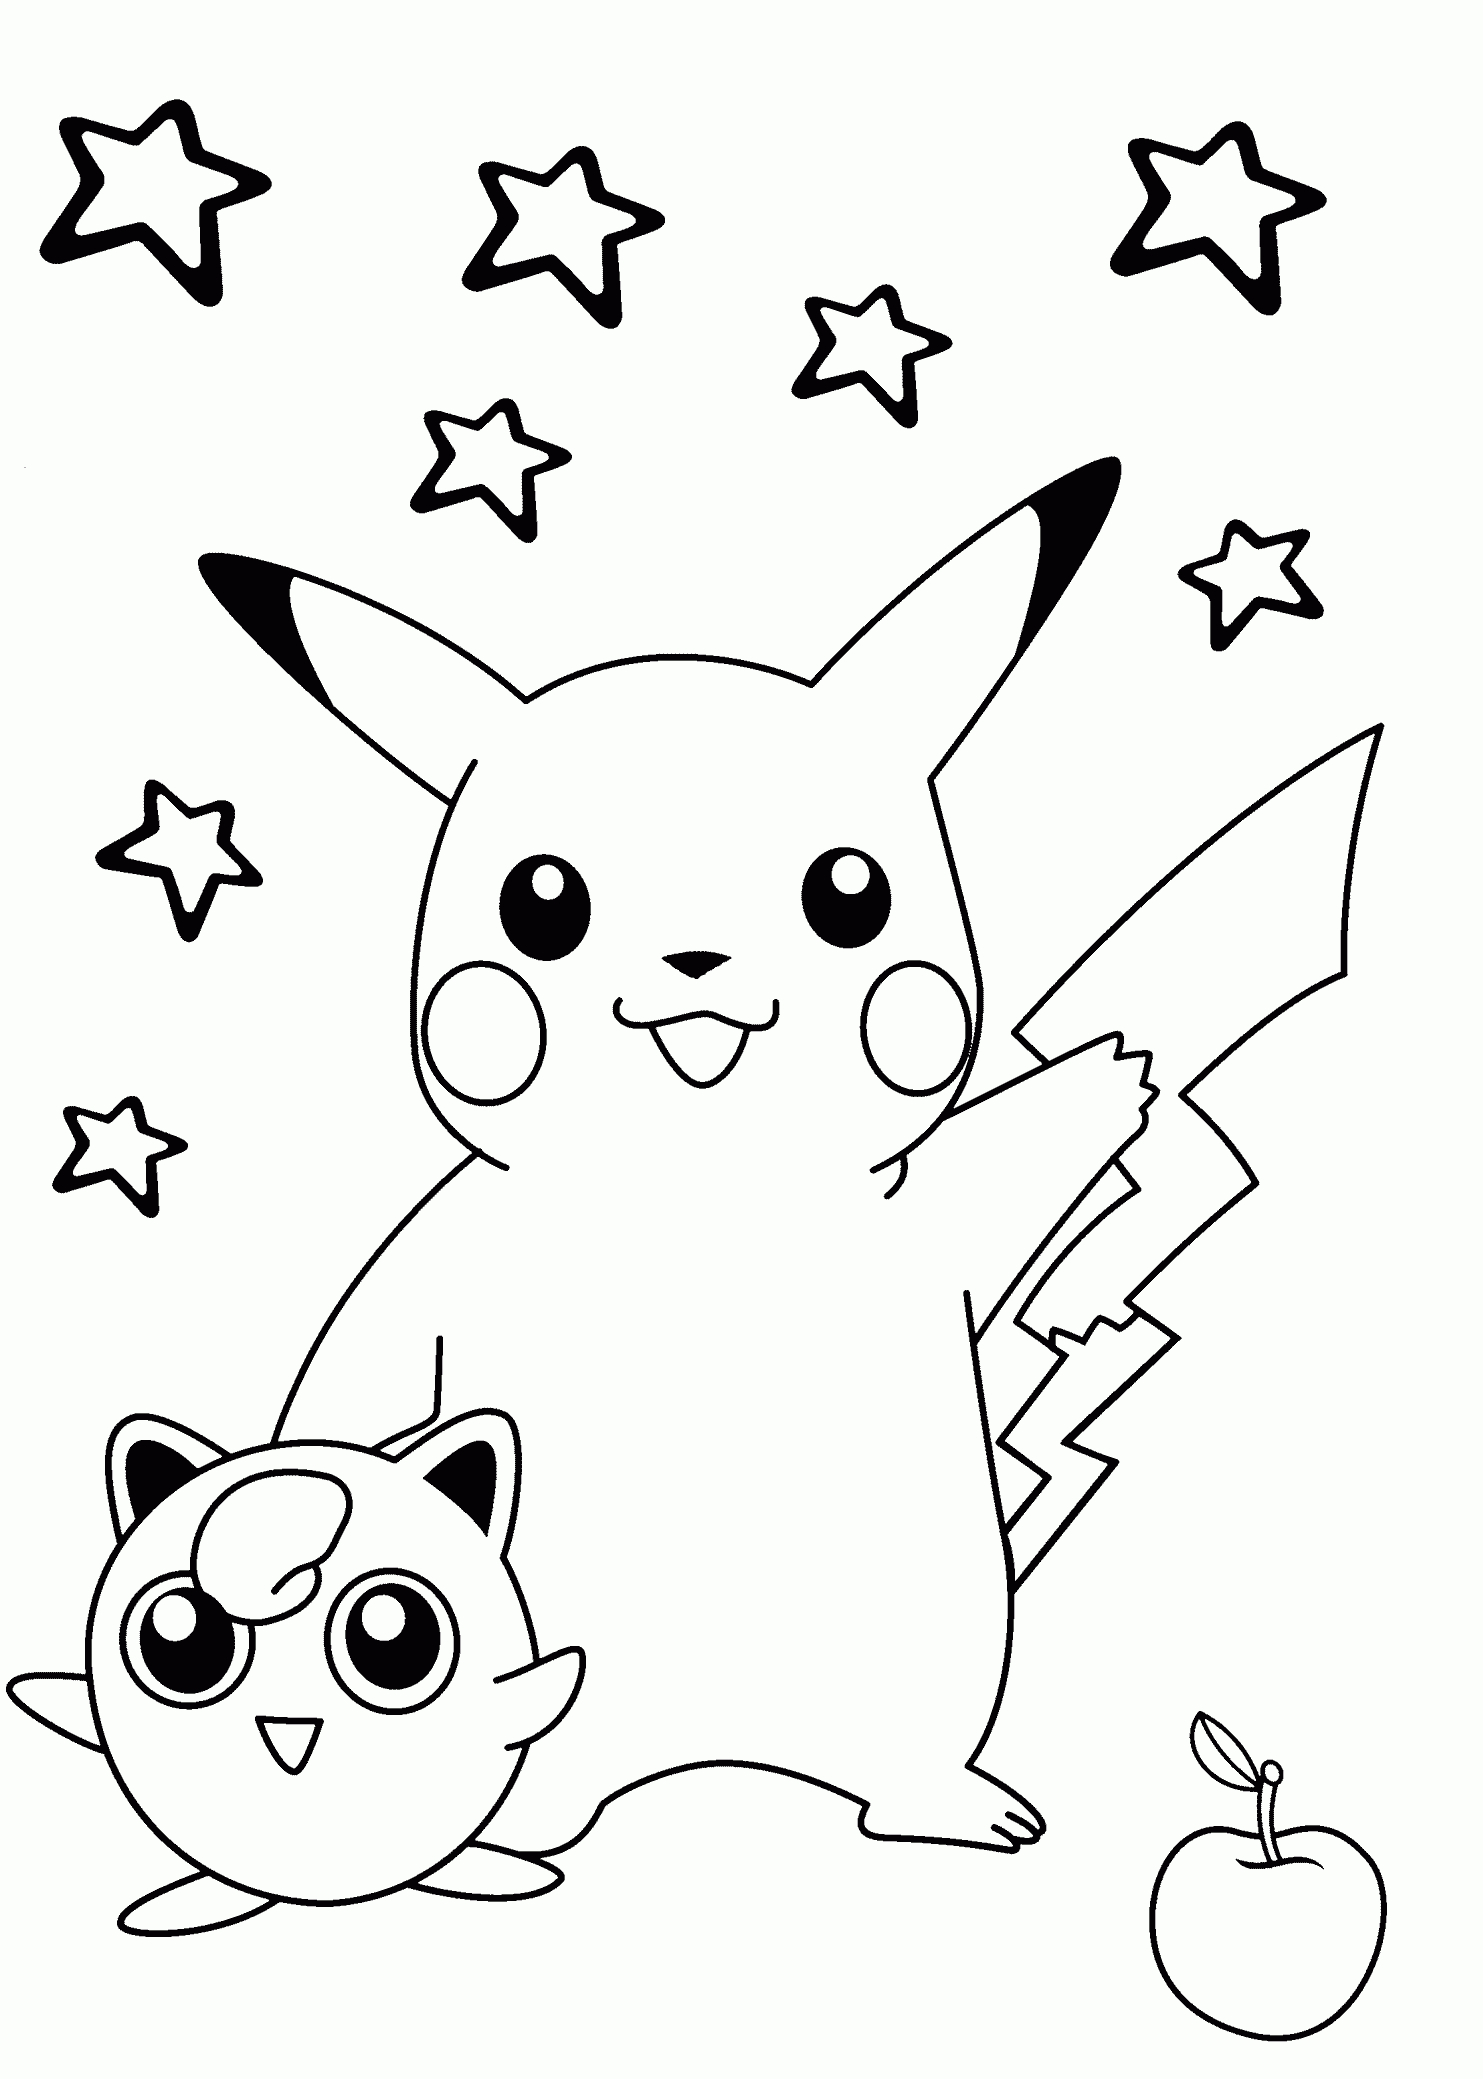 Smiling Pokemon Coloring Pages For Kids, Printable Free | Coloring - Free Printable Coloring Pages Pokemon Black White